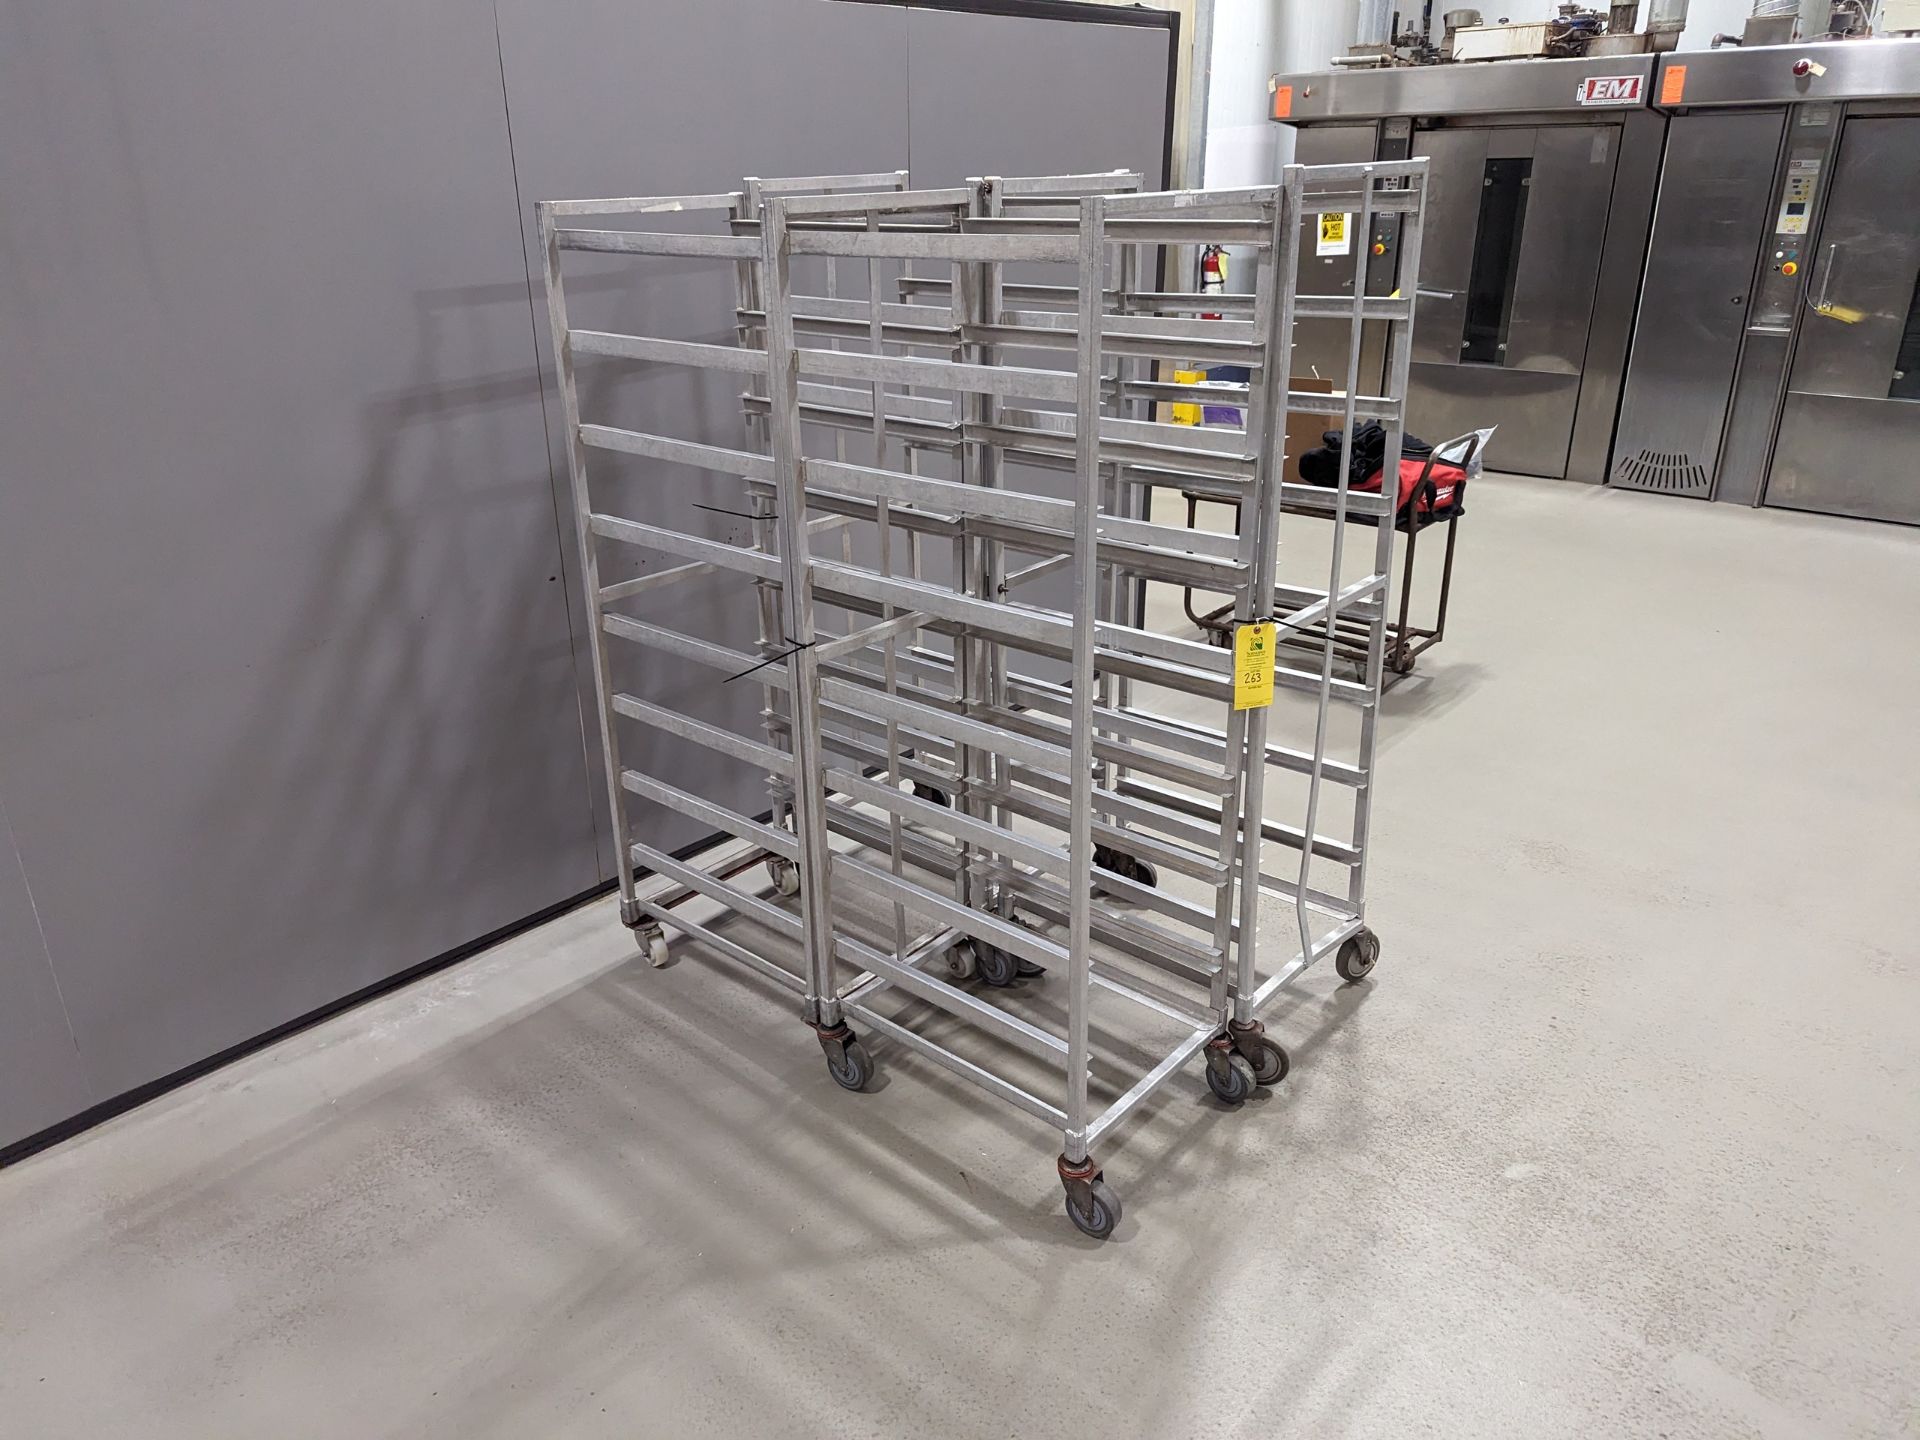 Lot of 4 Single Wide Aluminum Bakery Racks, Dimensions LxWxH: 57x37.5x69 Measurements are for lot - Image 3 of 7